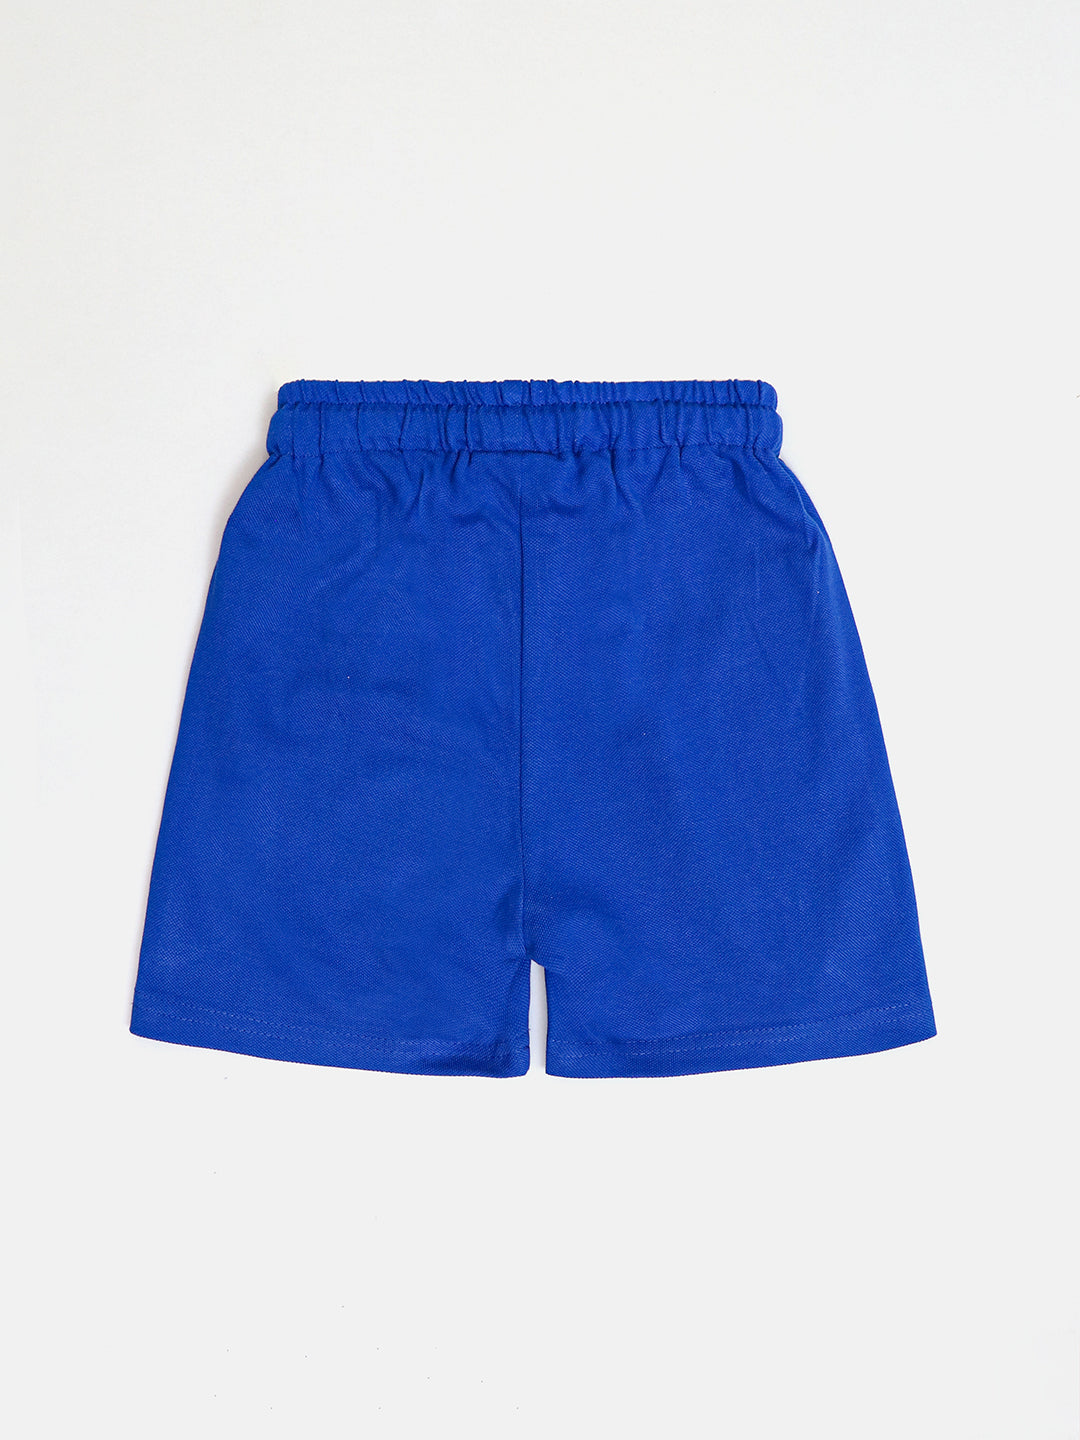 Boys Cotton Shorts Combo- Blue and White